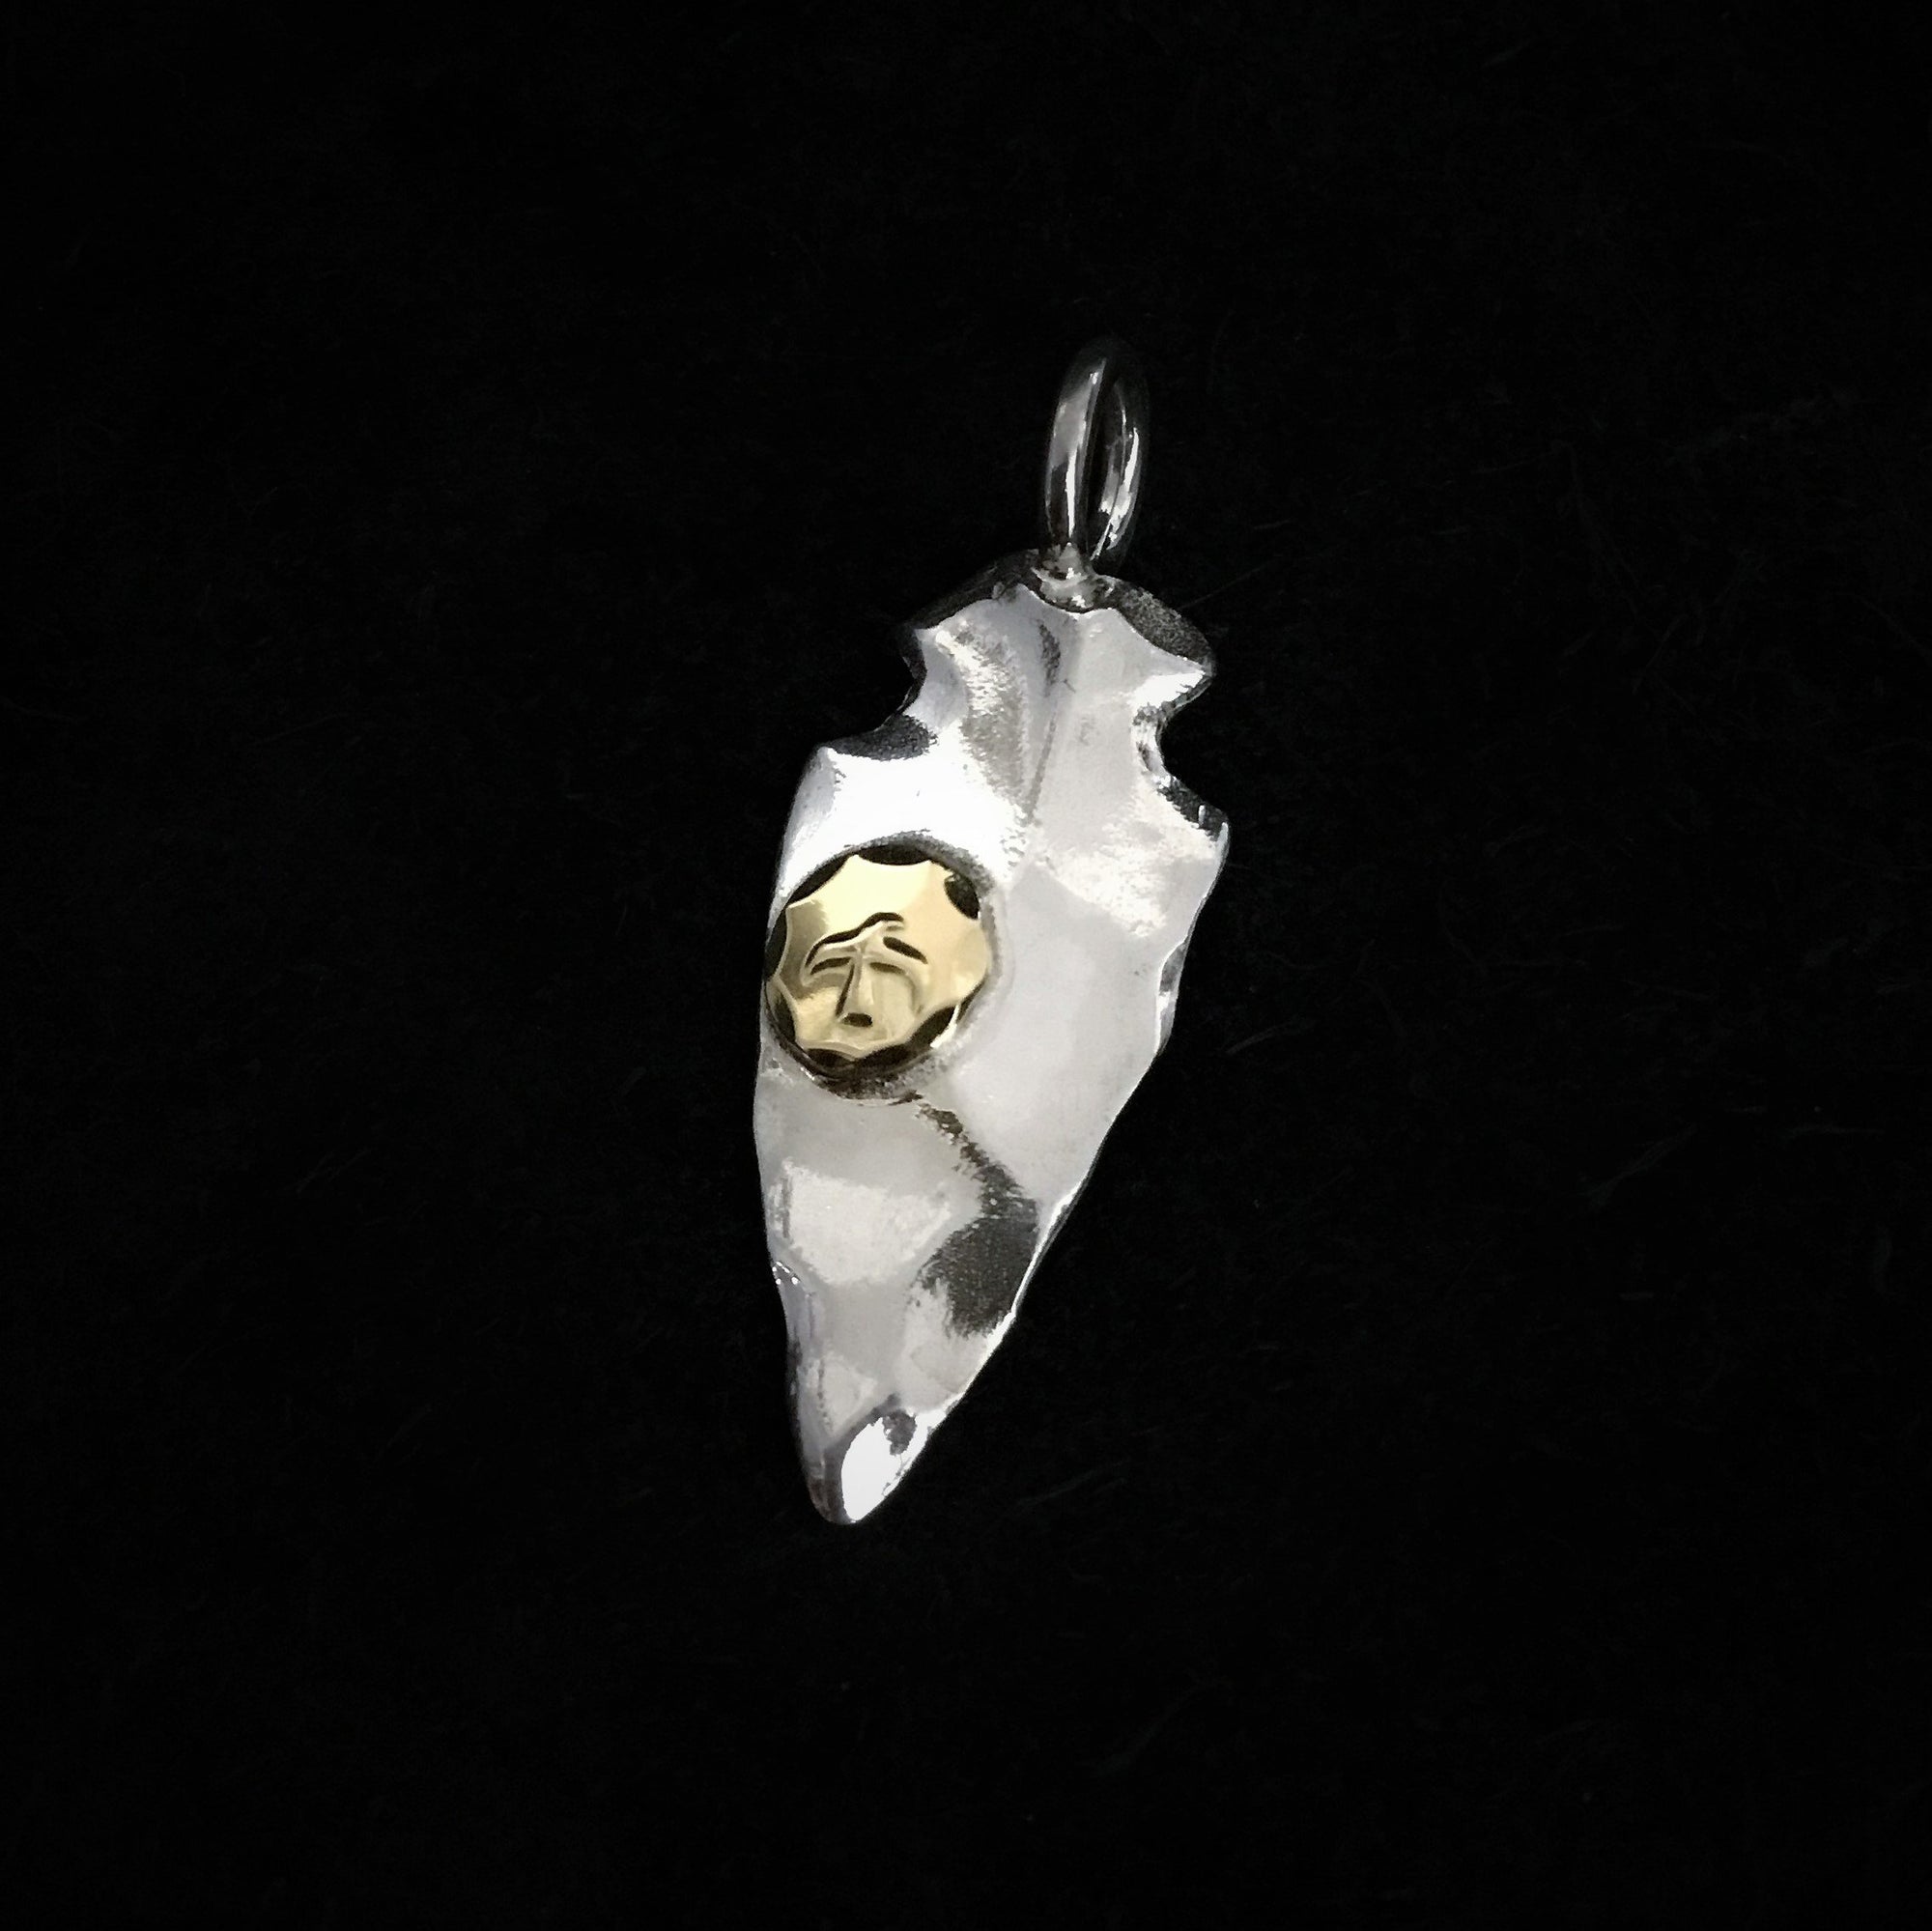 Arrowhead with K18 Gold Facing Right - Small | Goros Authorized Dealer